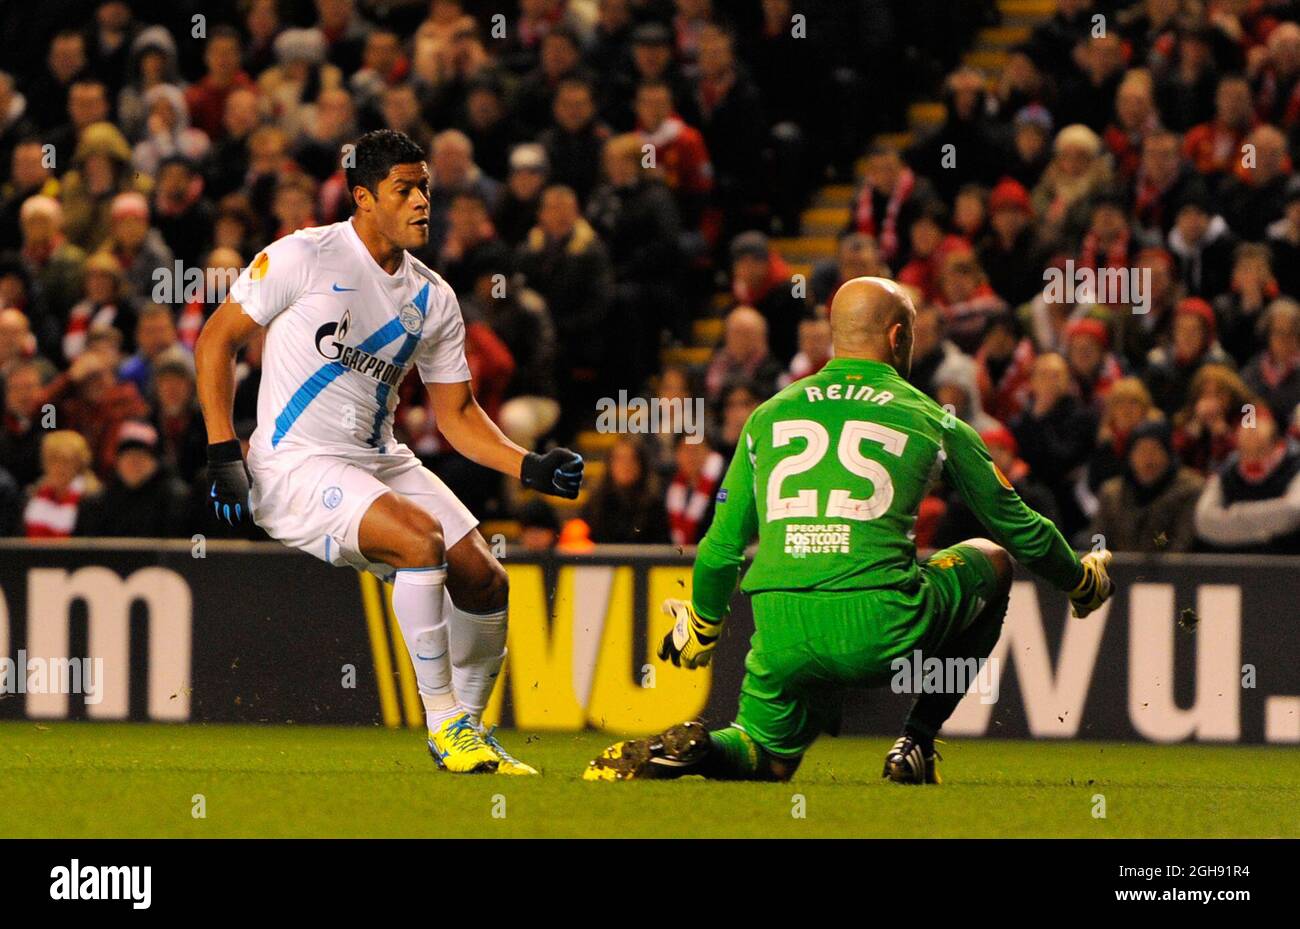 Hulk of Zenit St Petersburg scores past Jose Manuel Reina of Liverpool for the first goal during the UEFA Europa League Round of 32, Second Leg match between Liverpool and Zenit St Petersburg at the Anfield Stadium in Liverpool, United Kingdom on February 21, 2013. Stock Photo